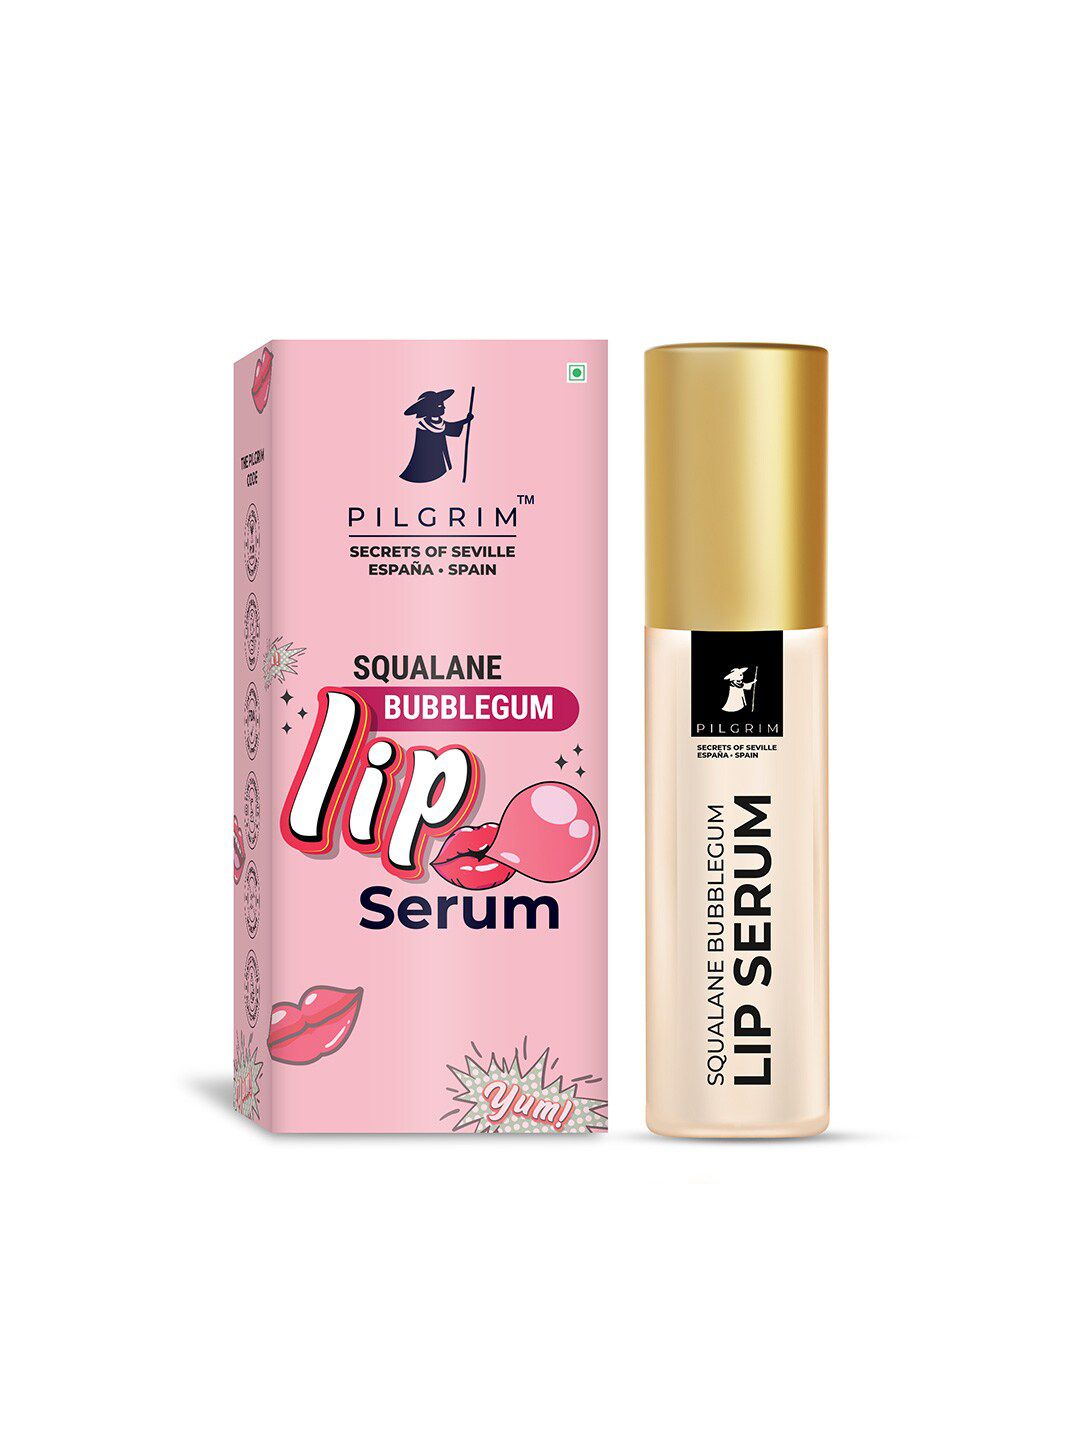 Pilgrim Squalane Bubblegum Lip Serum with roll-on for Visibly Plump, Soft & Supple Lips - 6ml Price in India